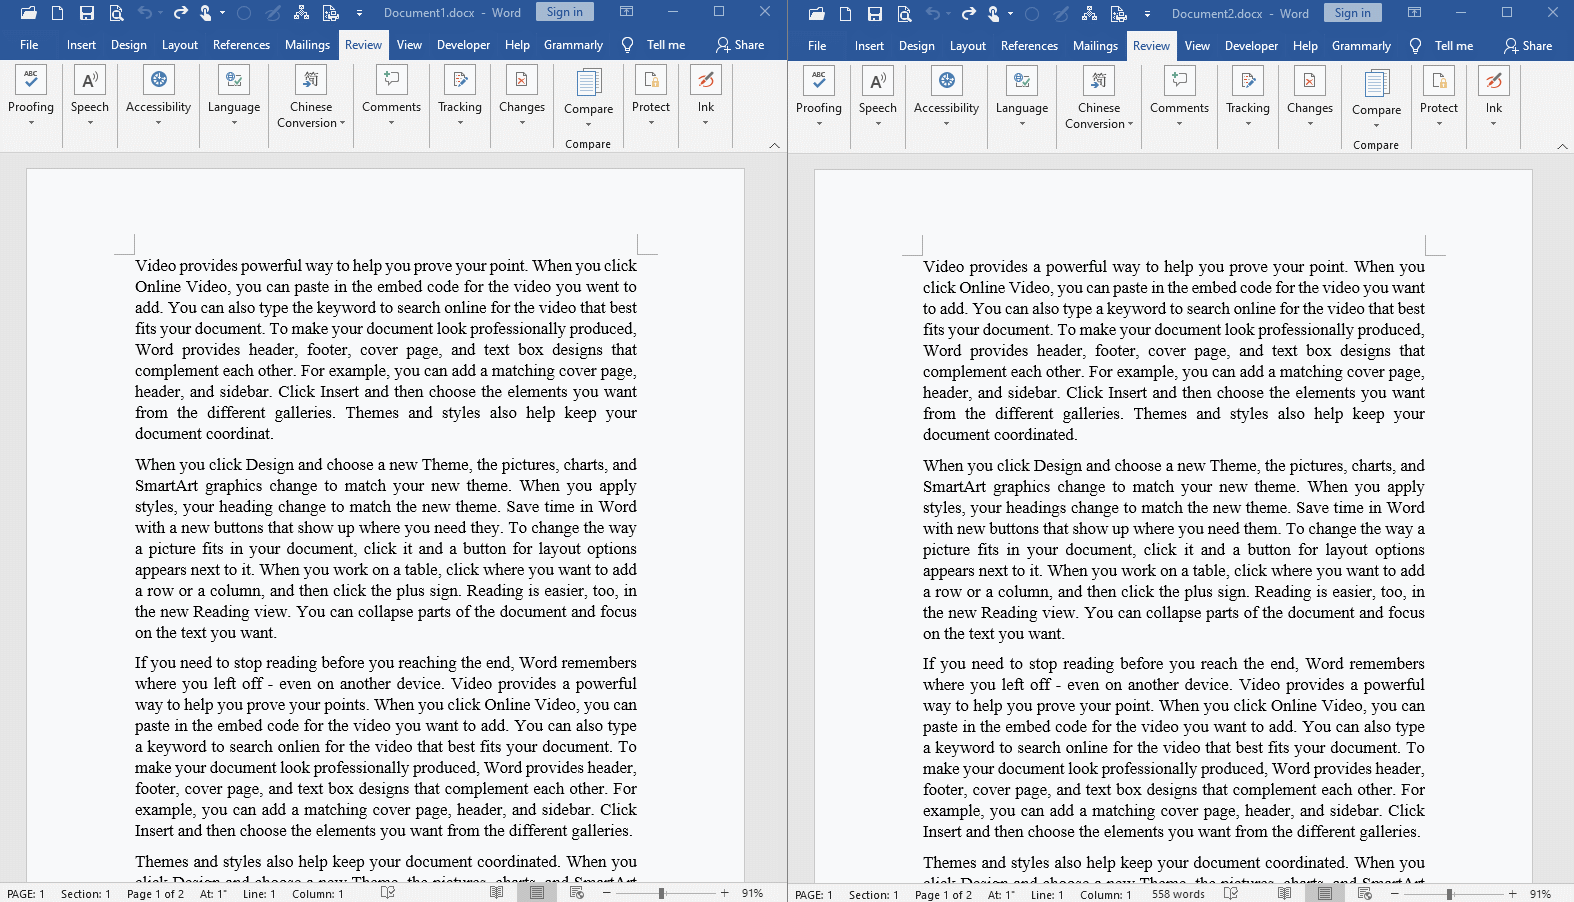 How to Quickly Find the Difference Between Two Word Documents?